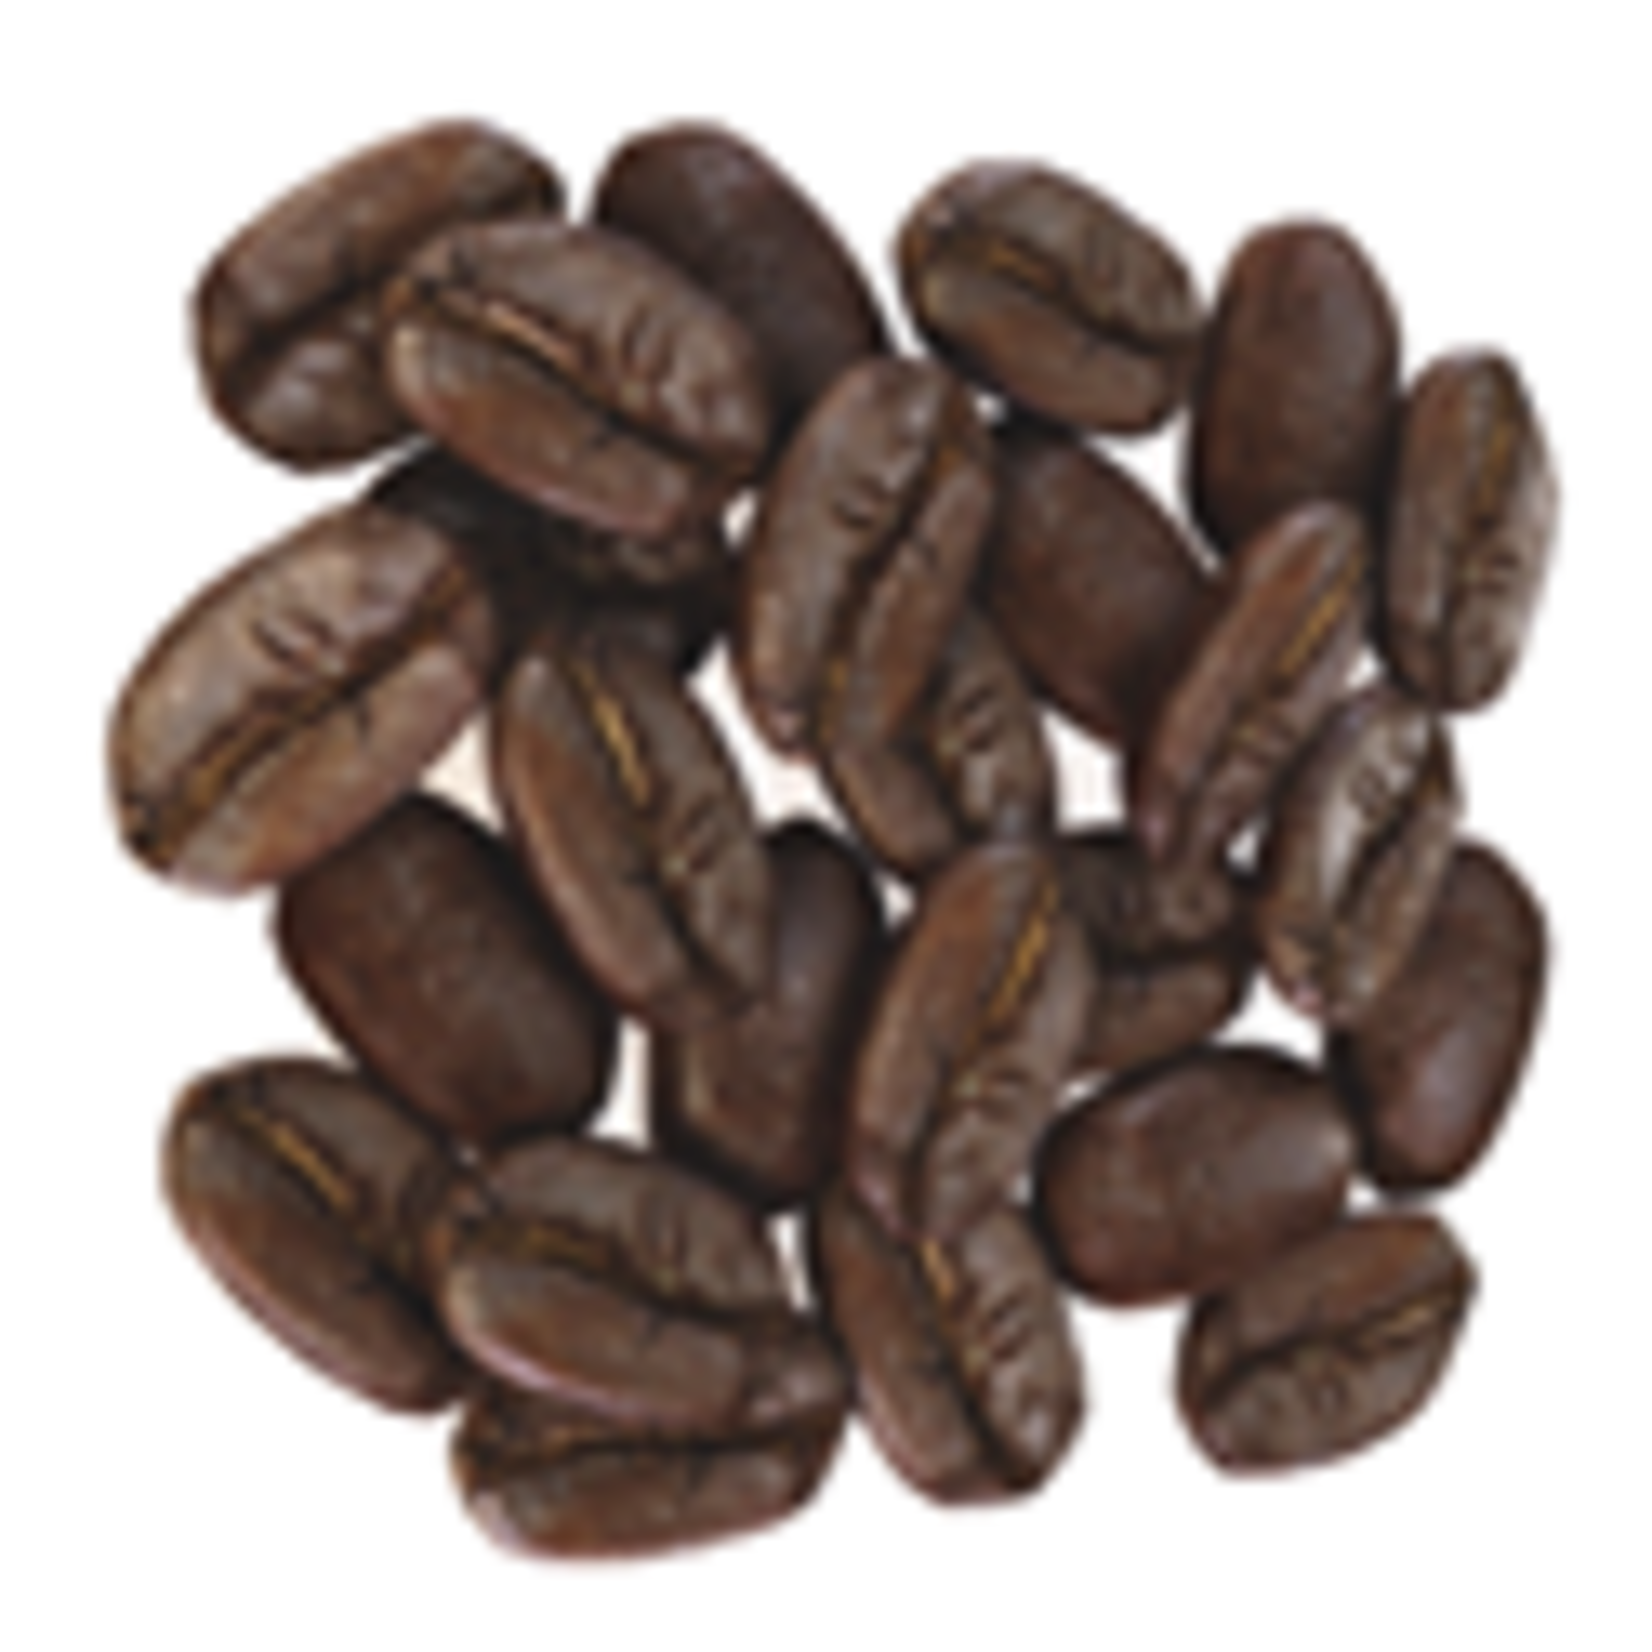 BrewBakers Coffee Bean Colombian Viennese 340g